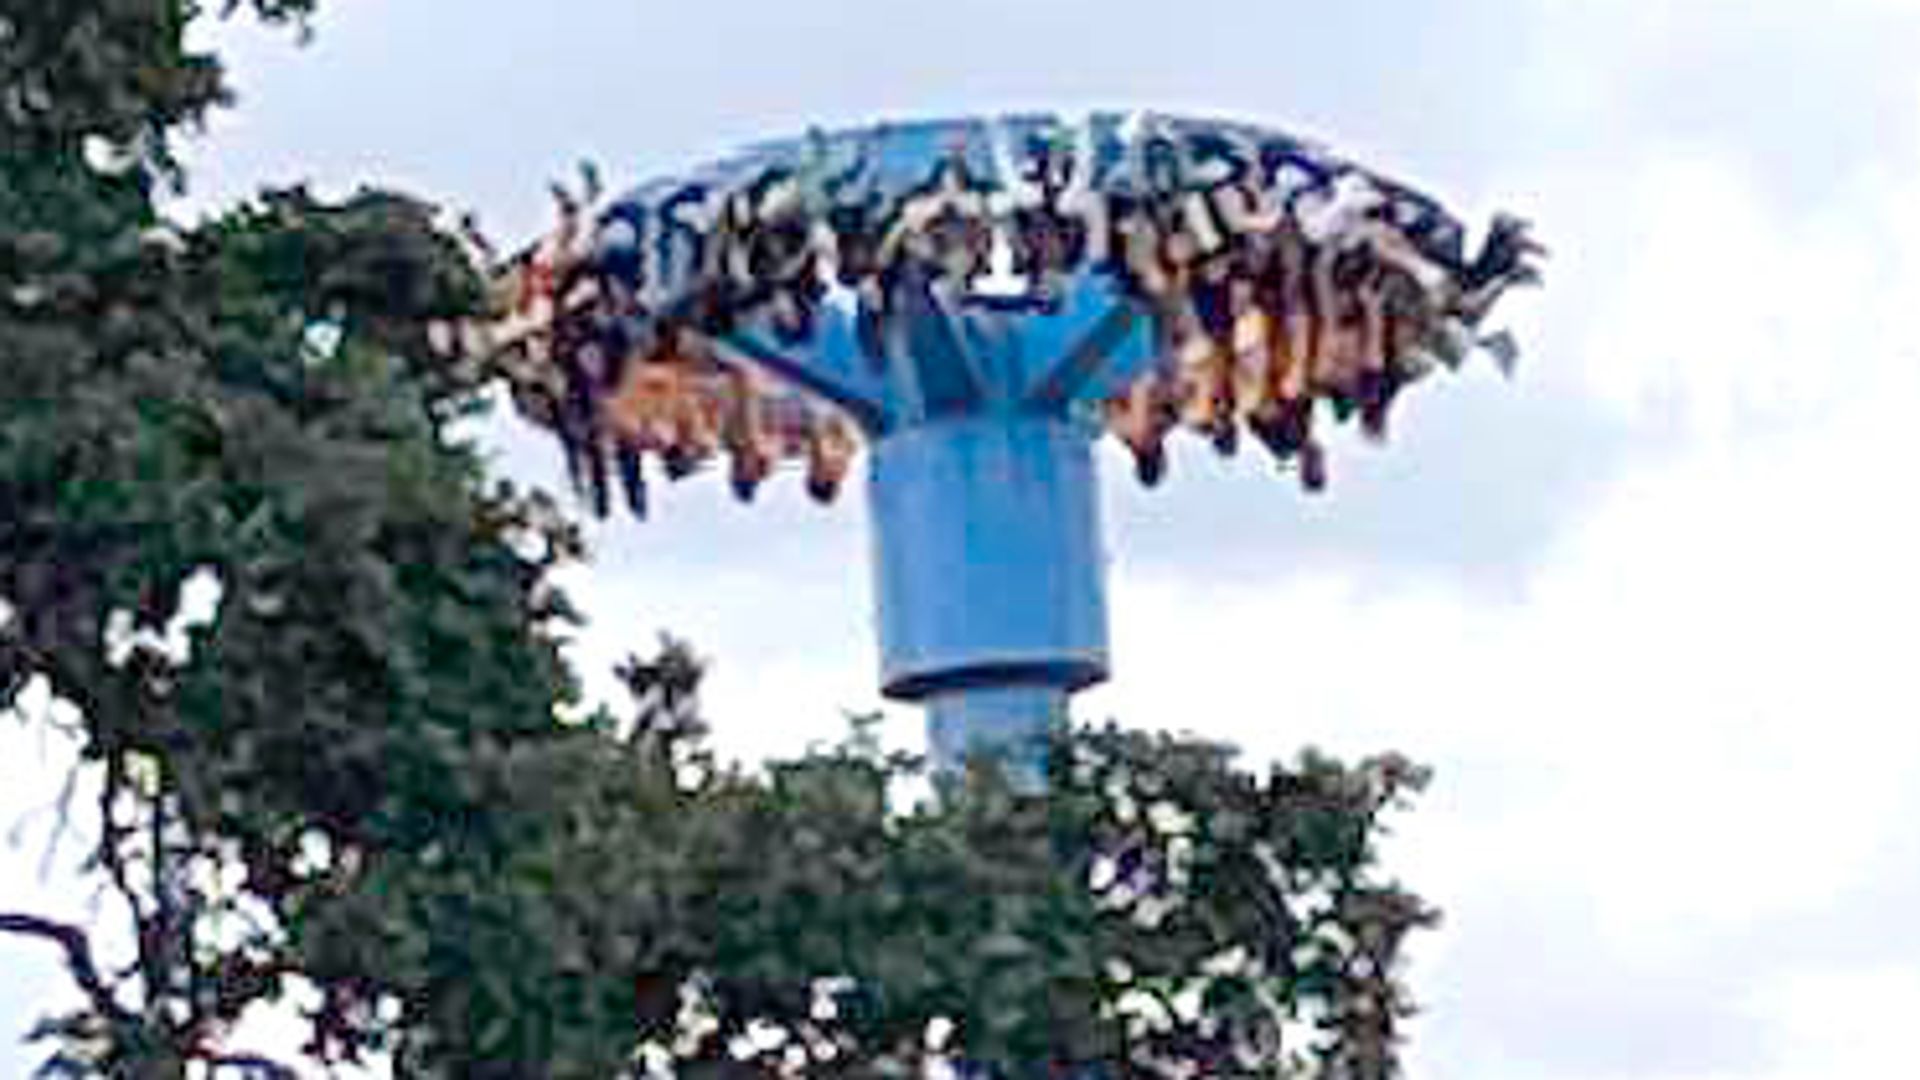 Dozens of people stuck upside down 100ft in the air on amusement park ride